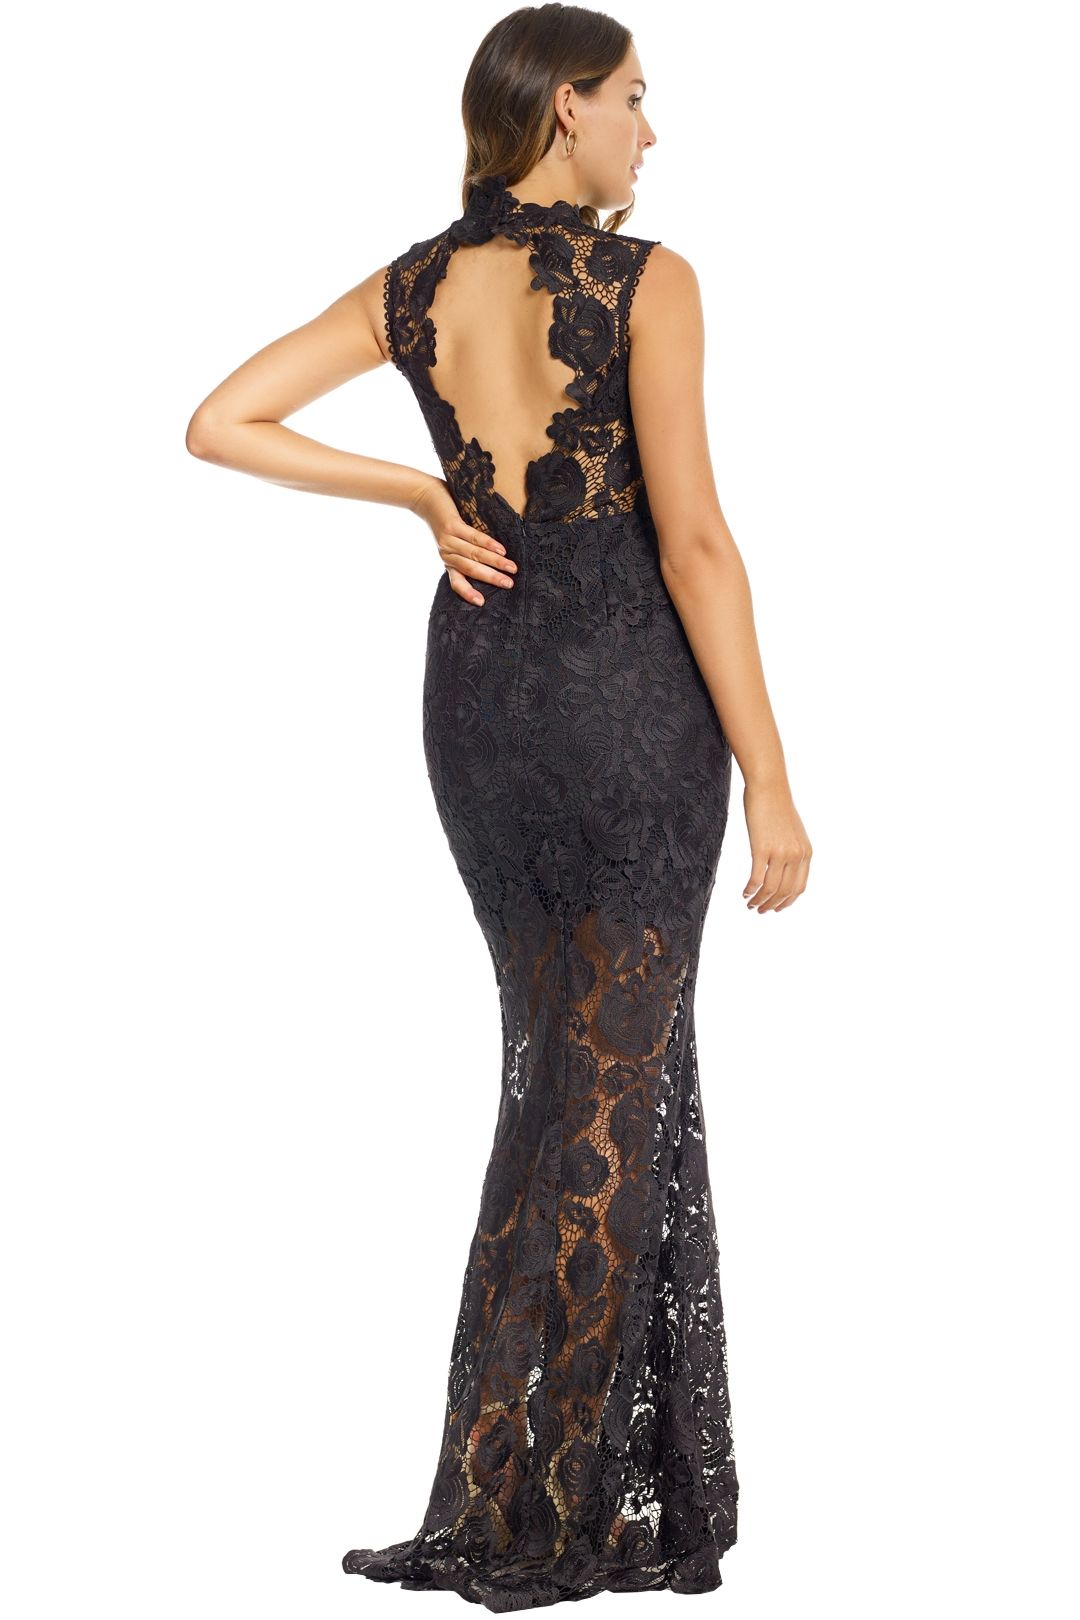 Grace and Hart - Espresso Gown - Black - Back